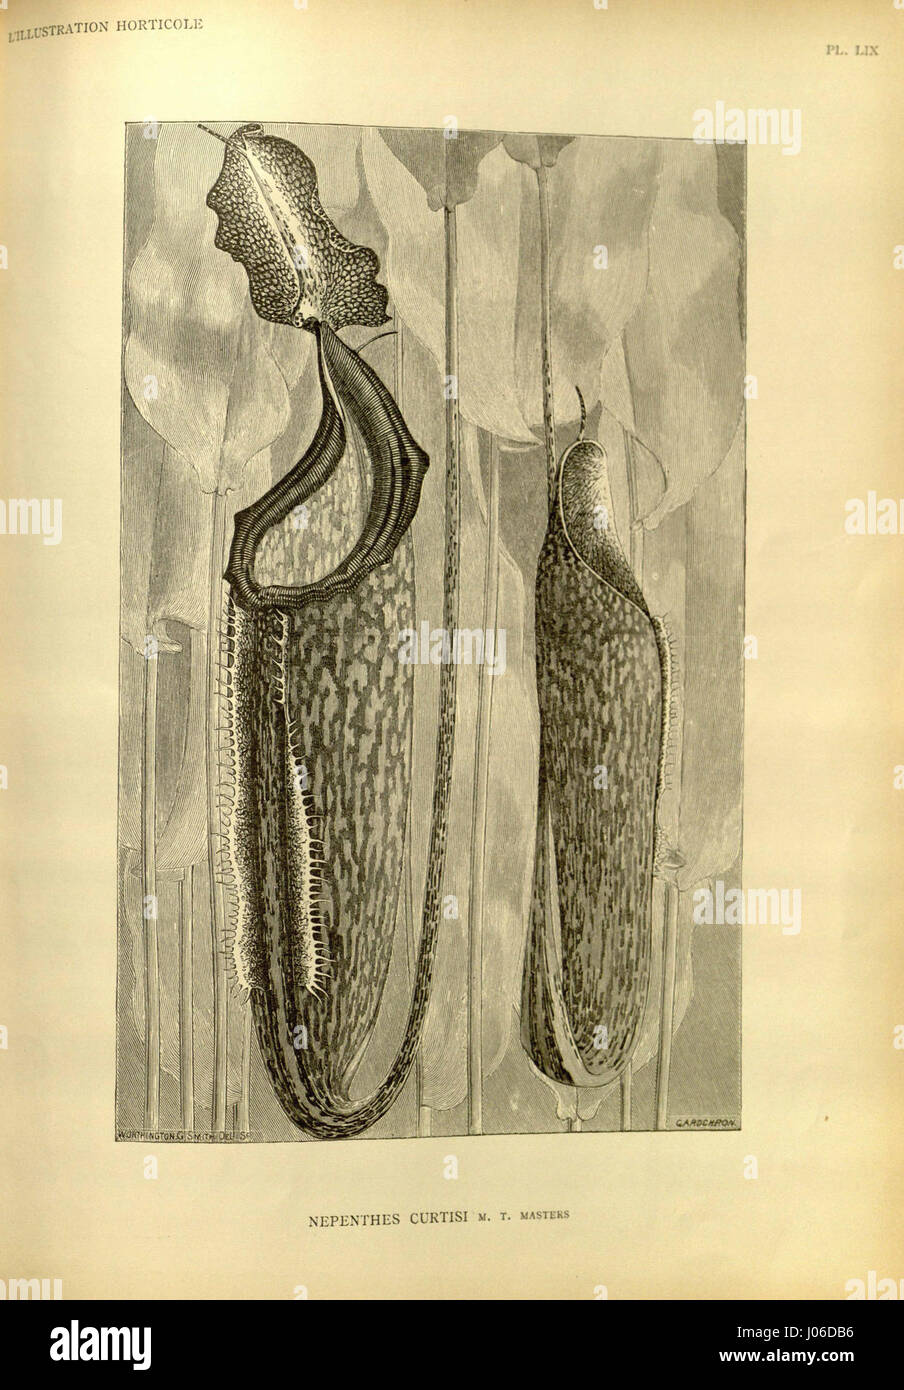 Nepenthes curtisii - LE28099Illustration horticole (1888) Stock Photo